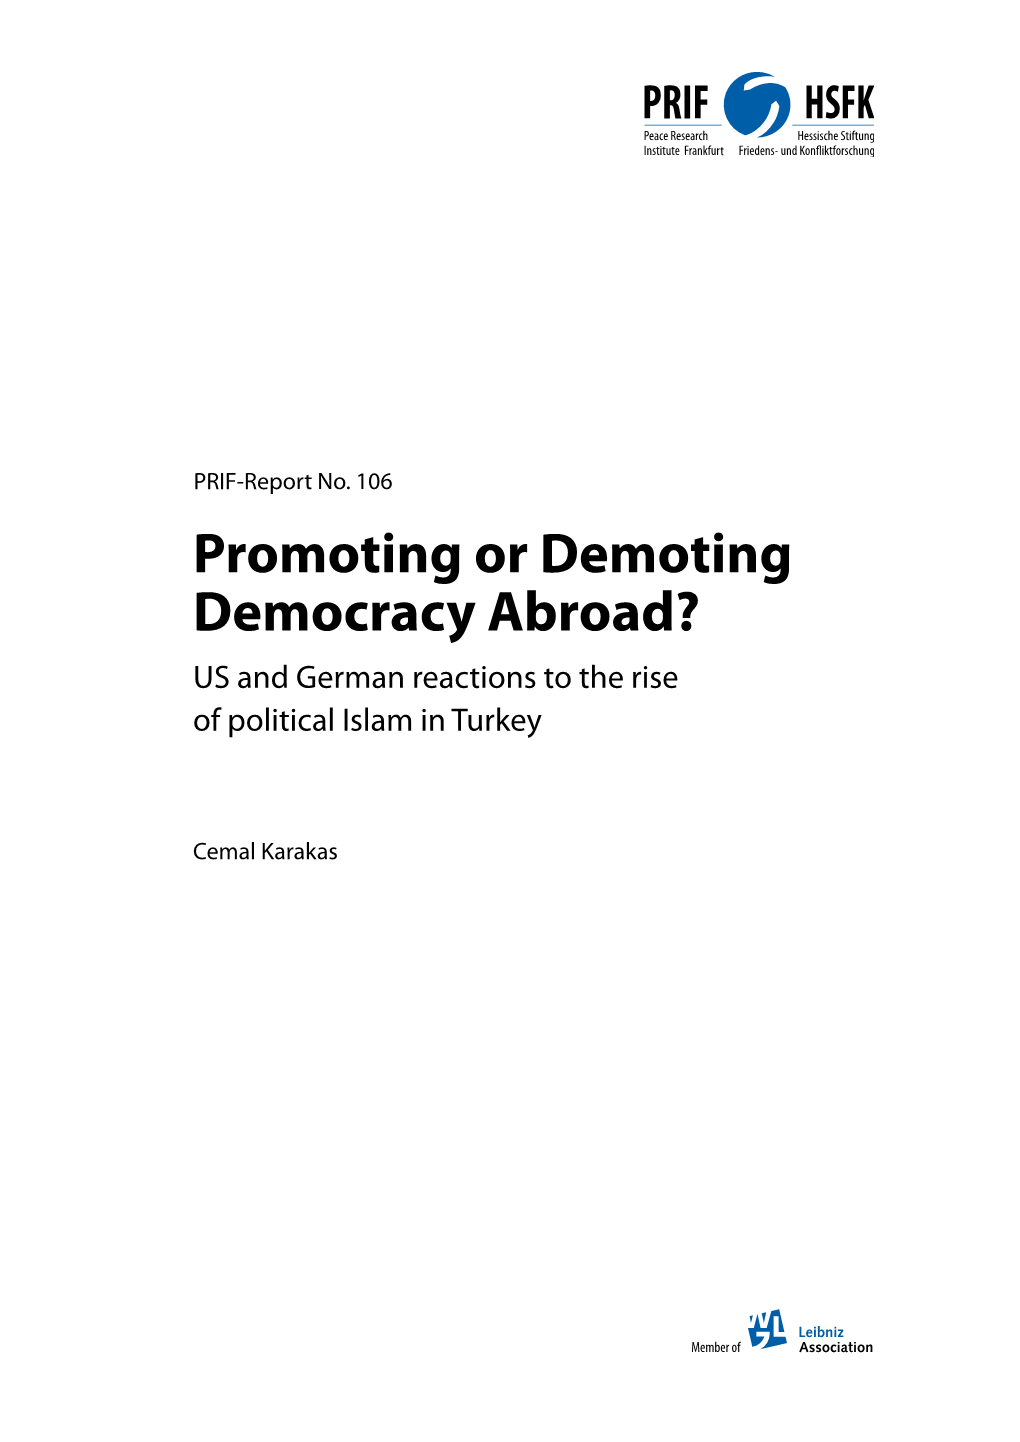 Promoting Or Demoting Democracy Abroad? US and German Reactions to the Rise of Political Islam in Turkey